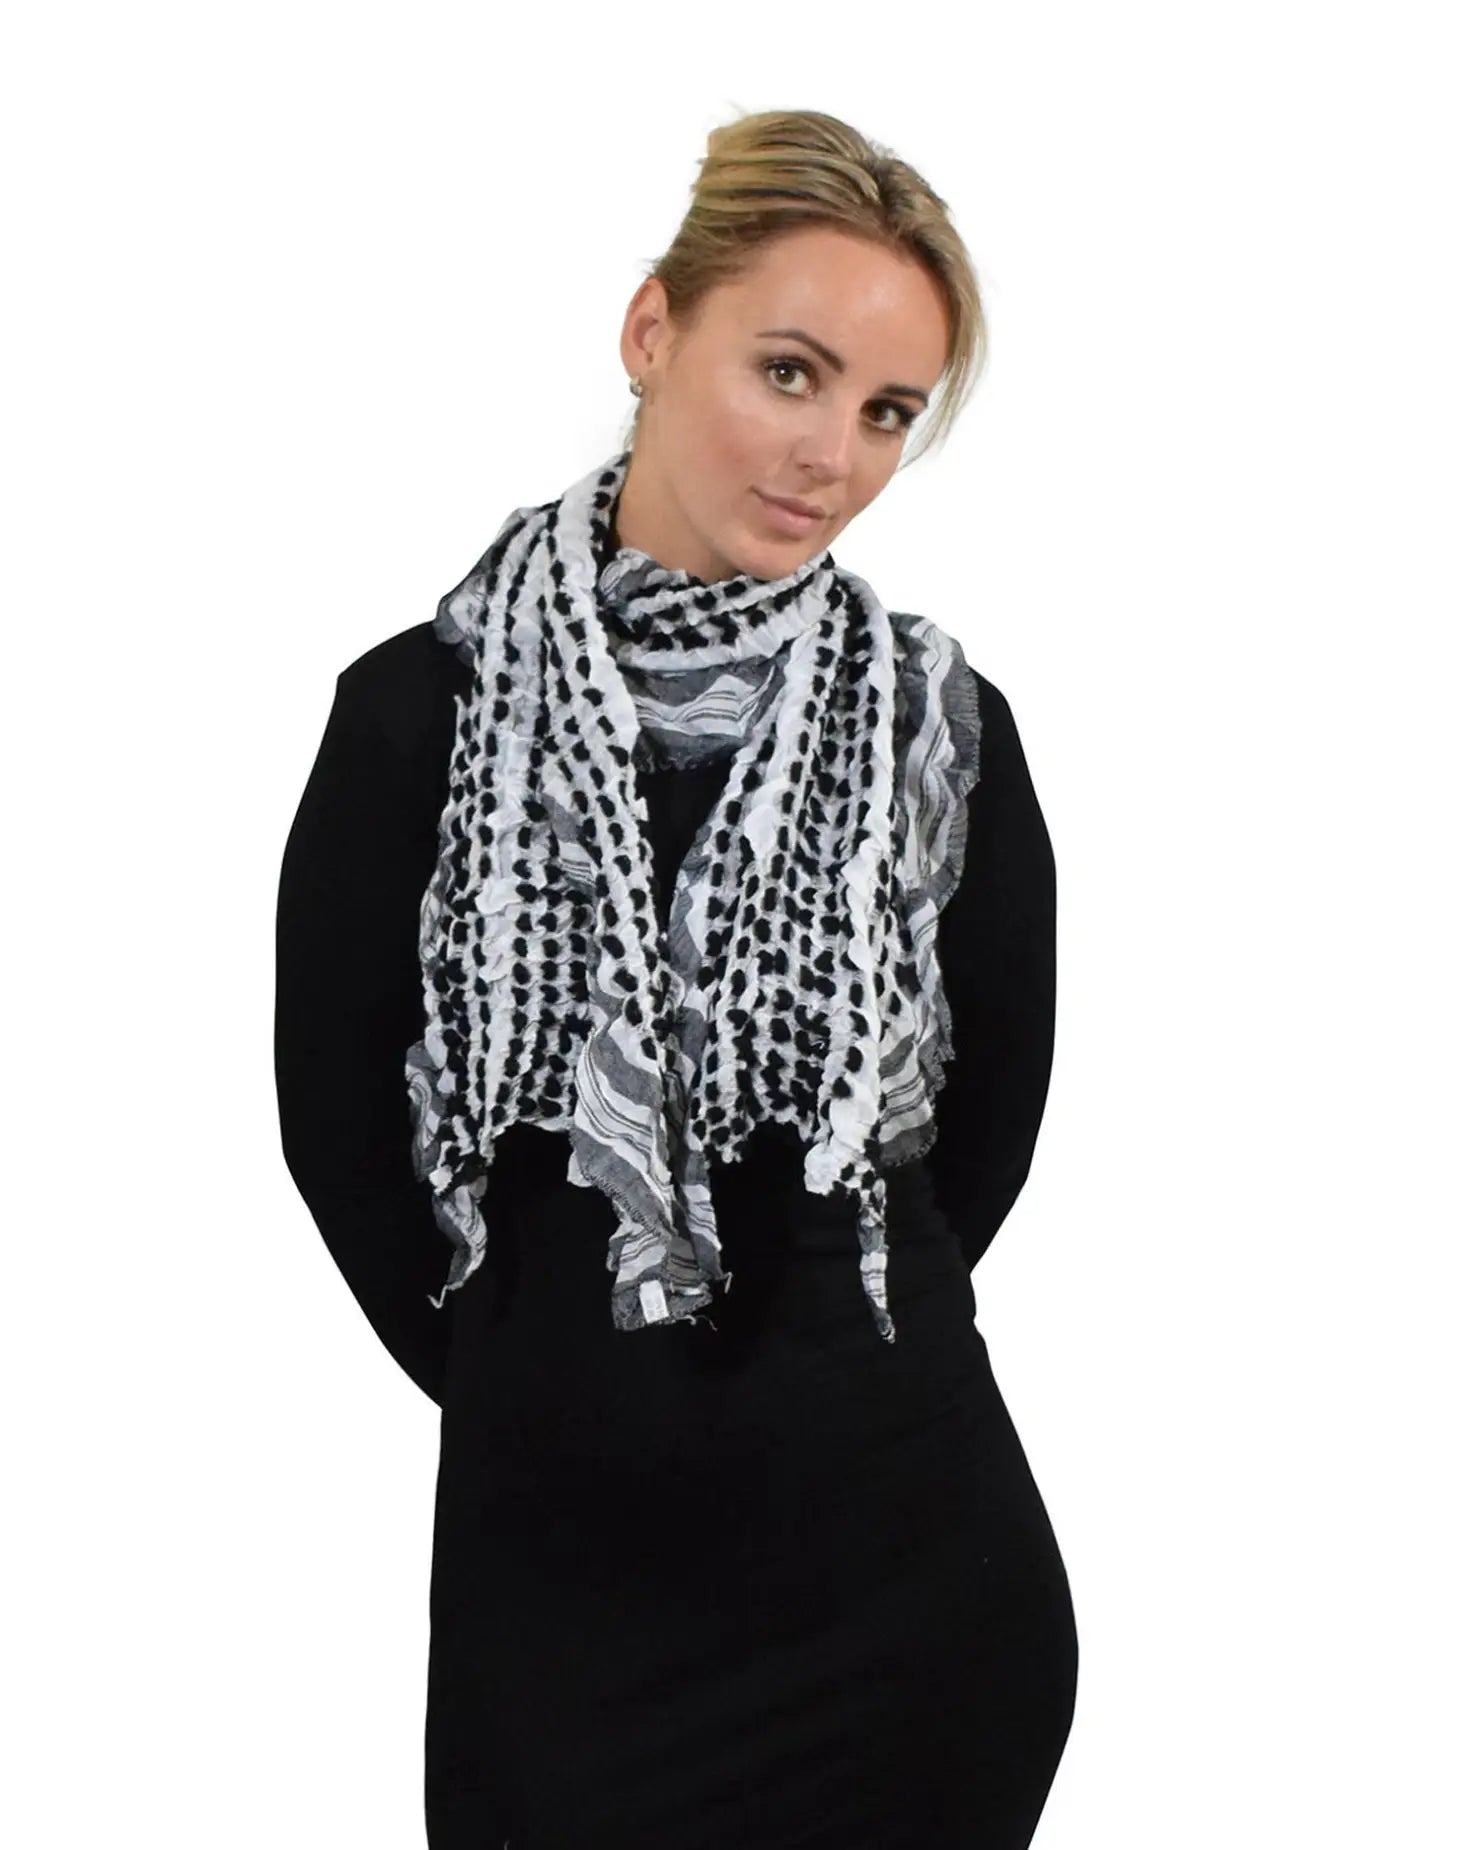 Soft knitted scarf with ruffled texture and striped print worn by a woman